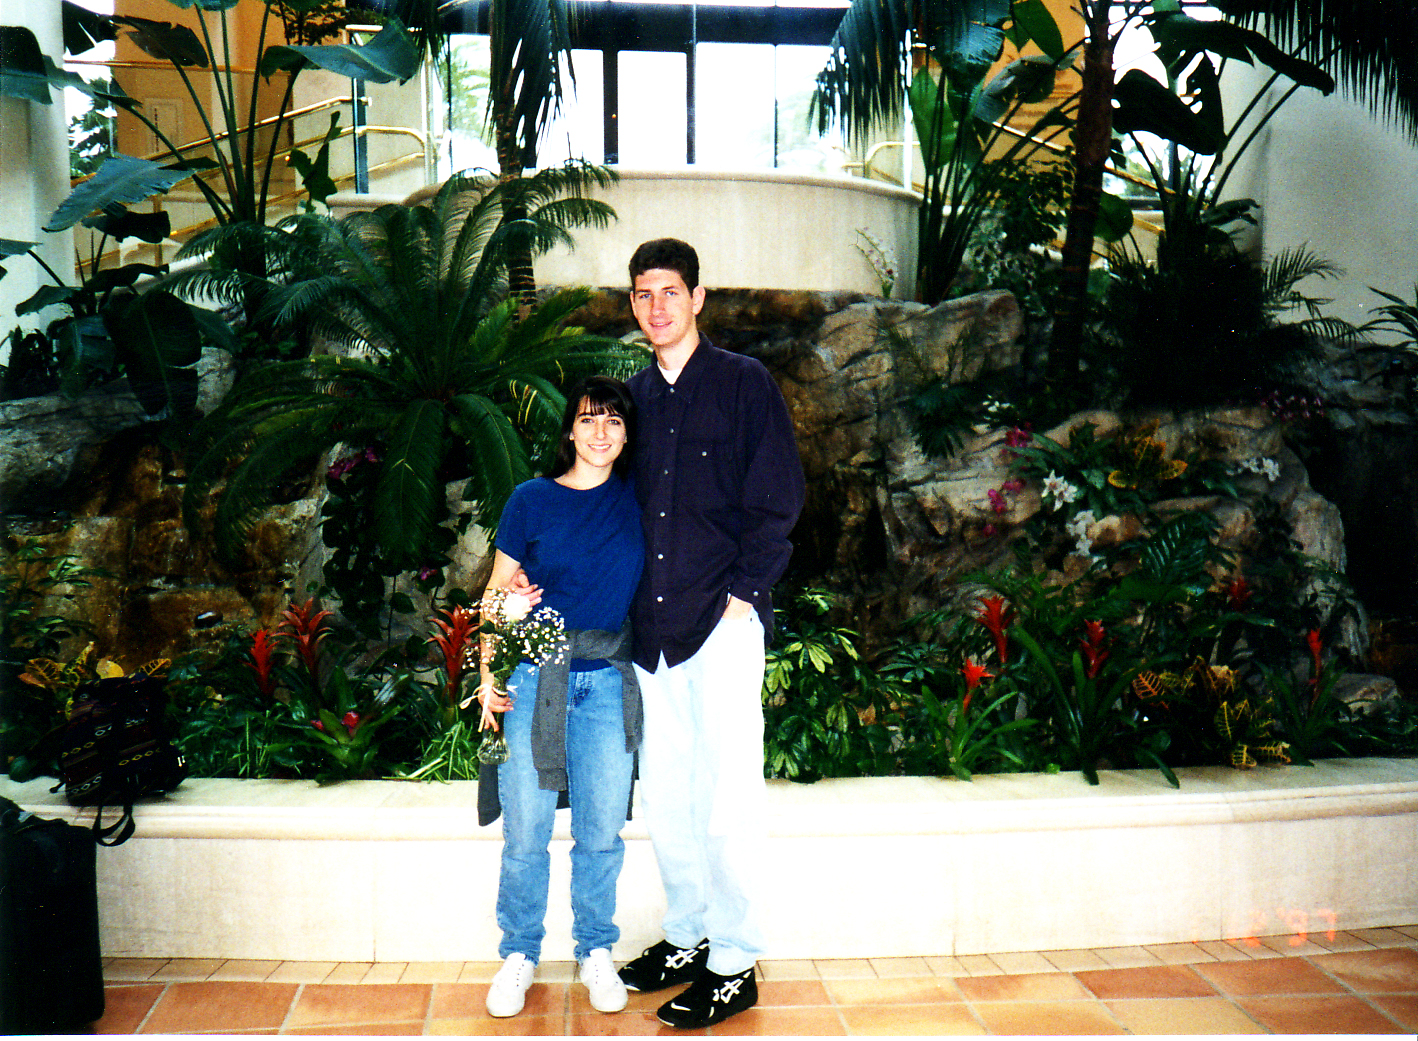 [jeff+and+wendy+at+hilton+fountain+1997.jpg]